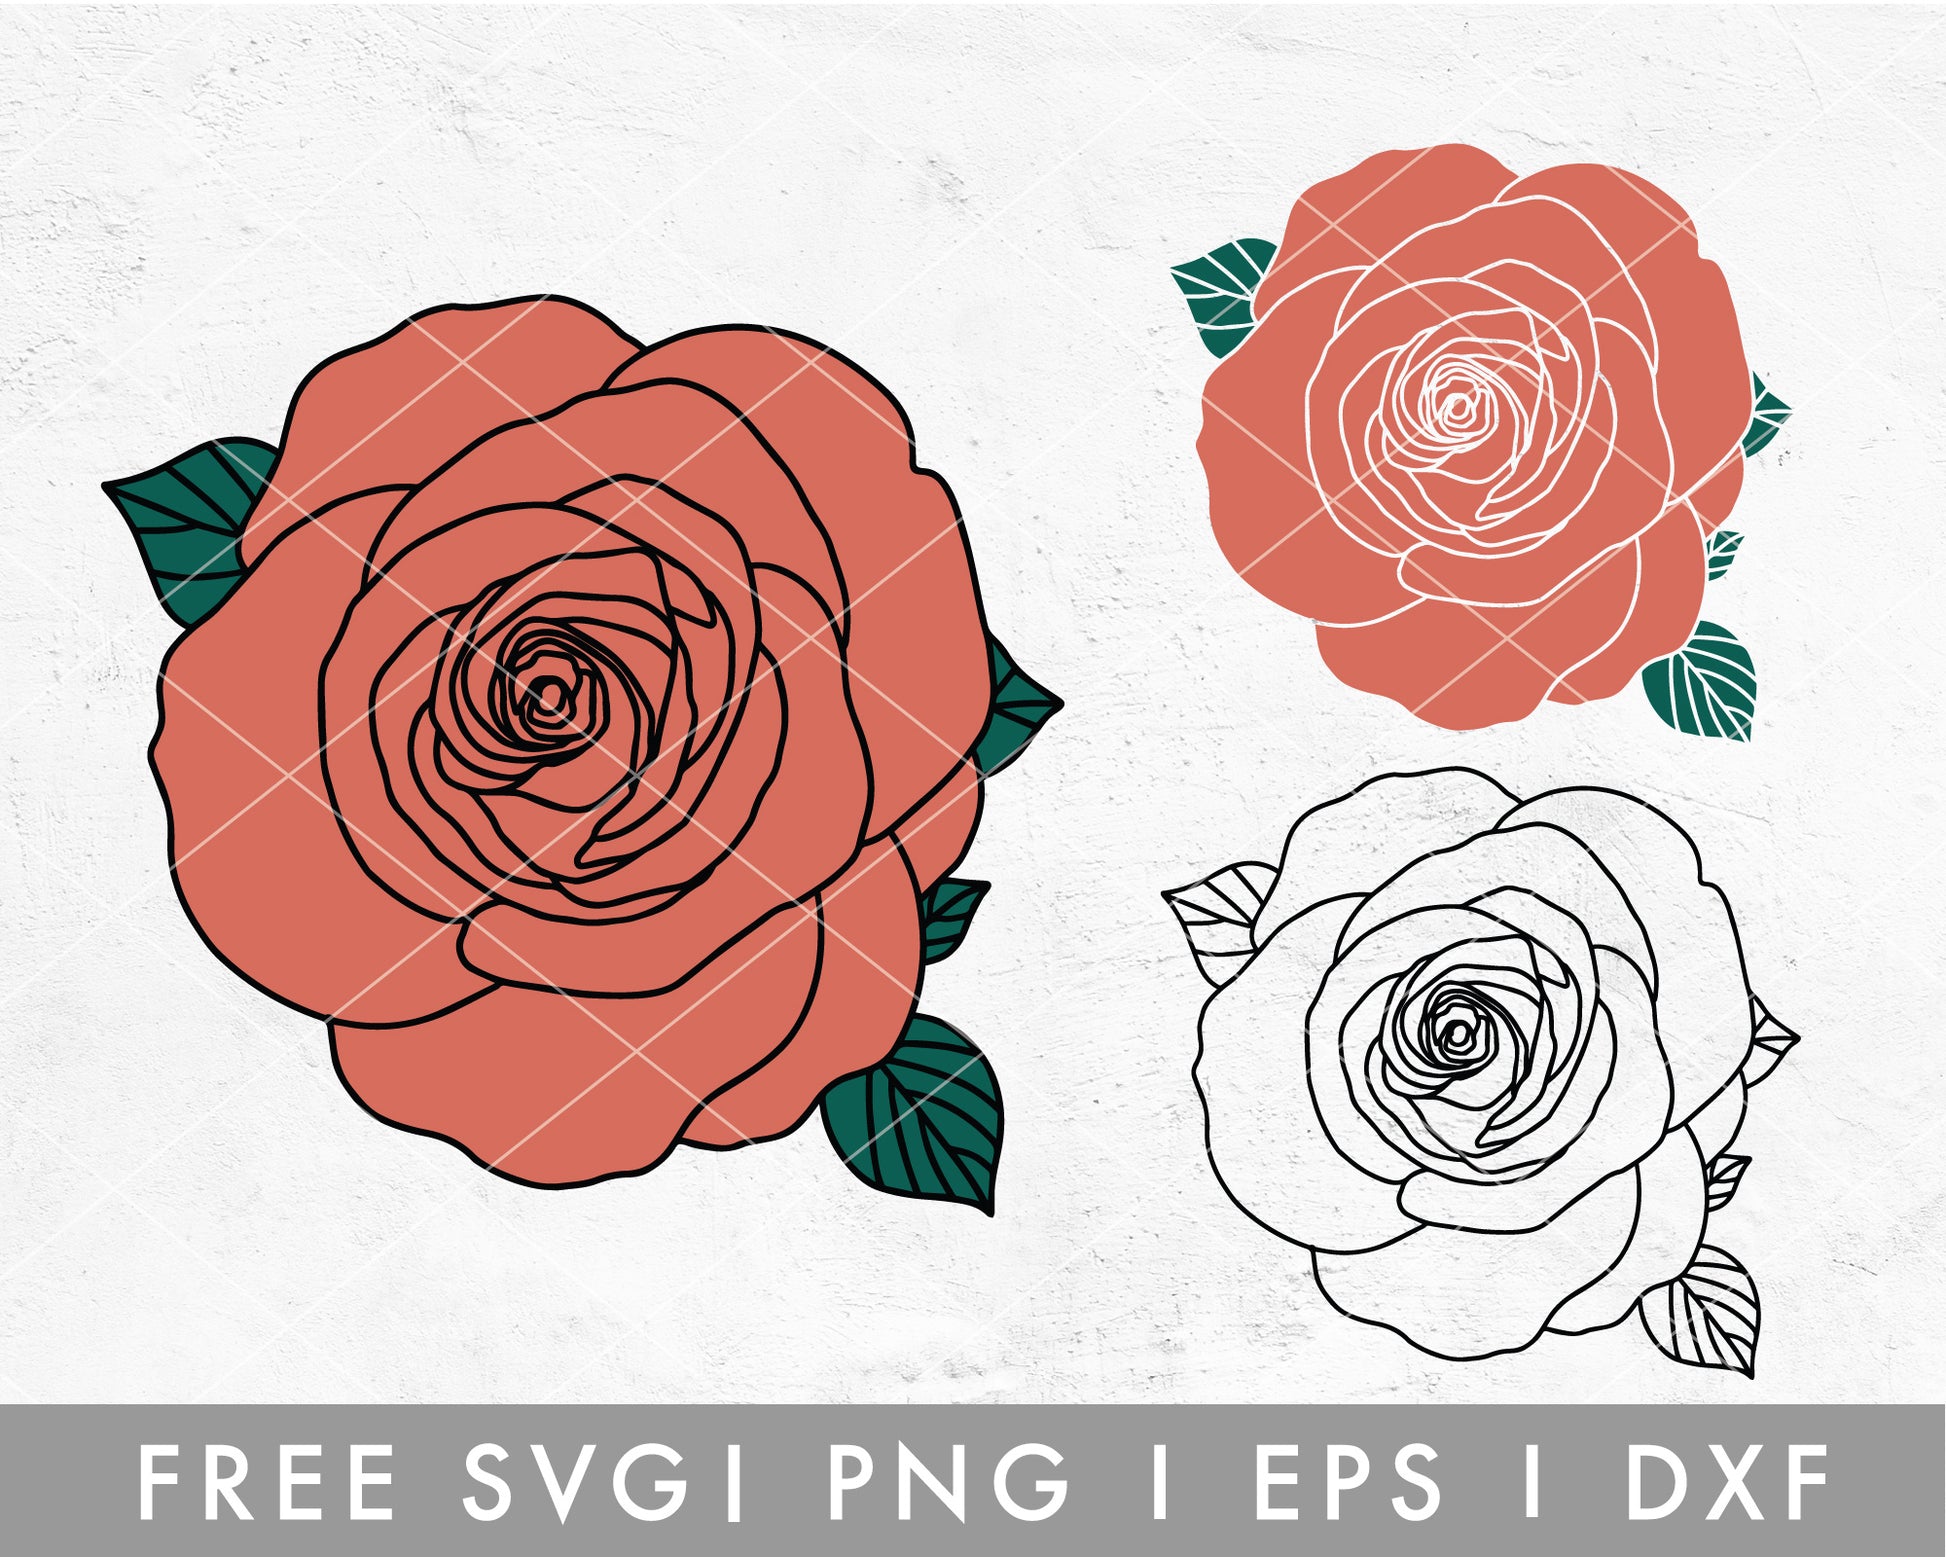 FREE Hand Drawn Rose SVG Cut File for Cricut, Cameo Silhouette